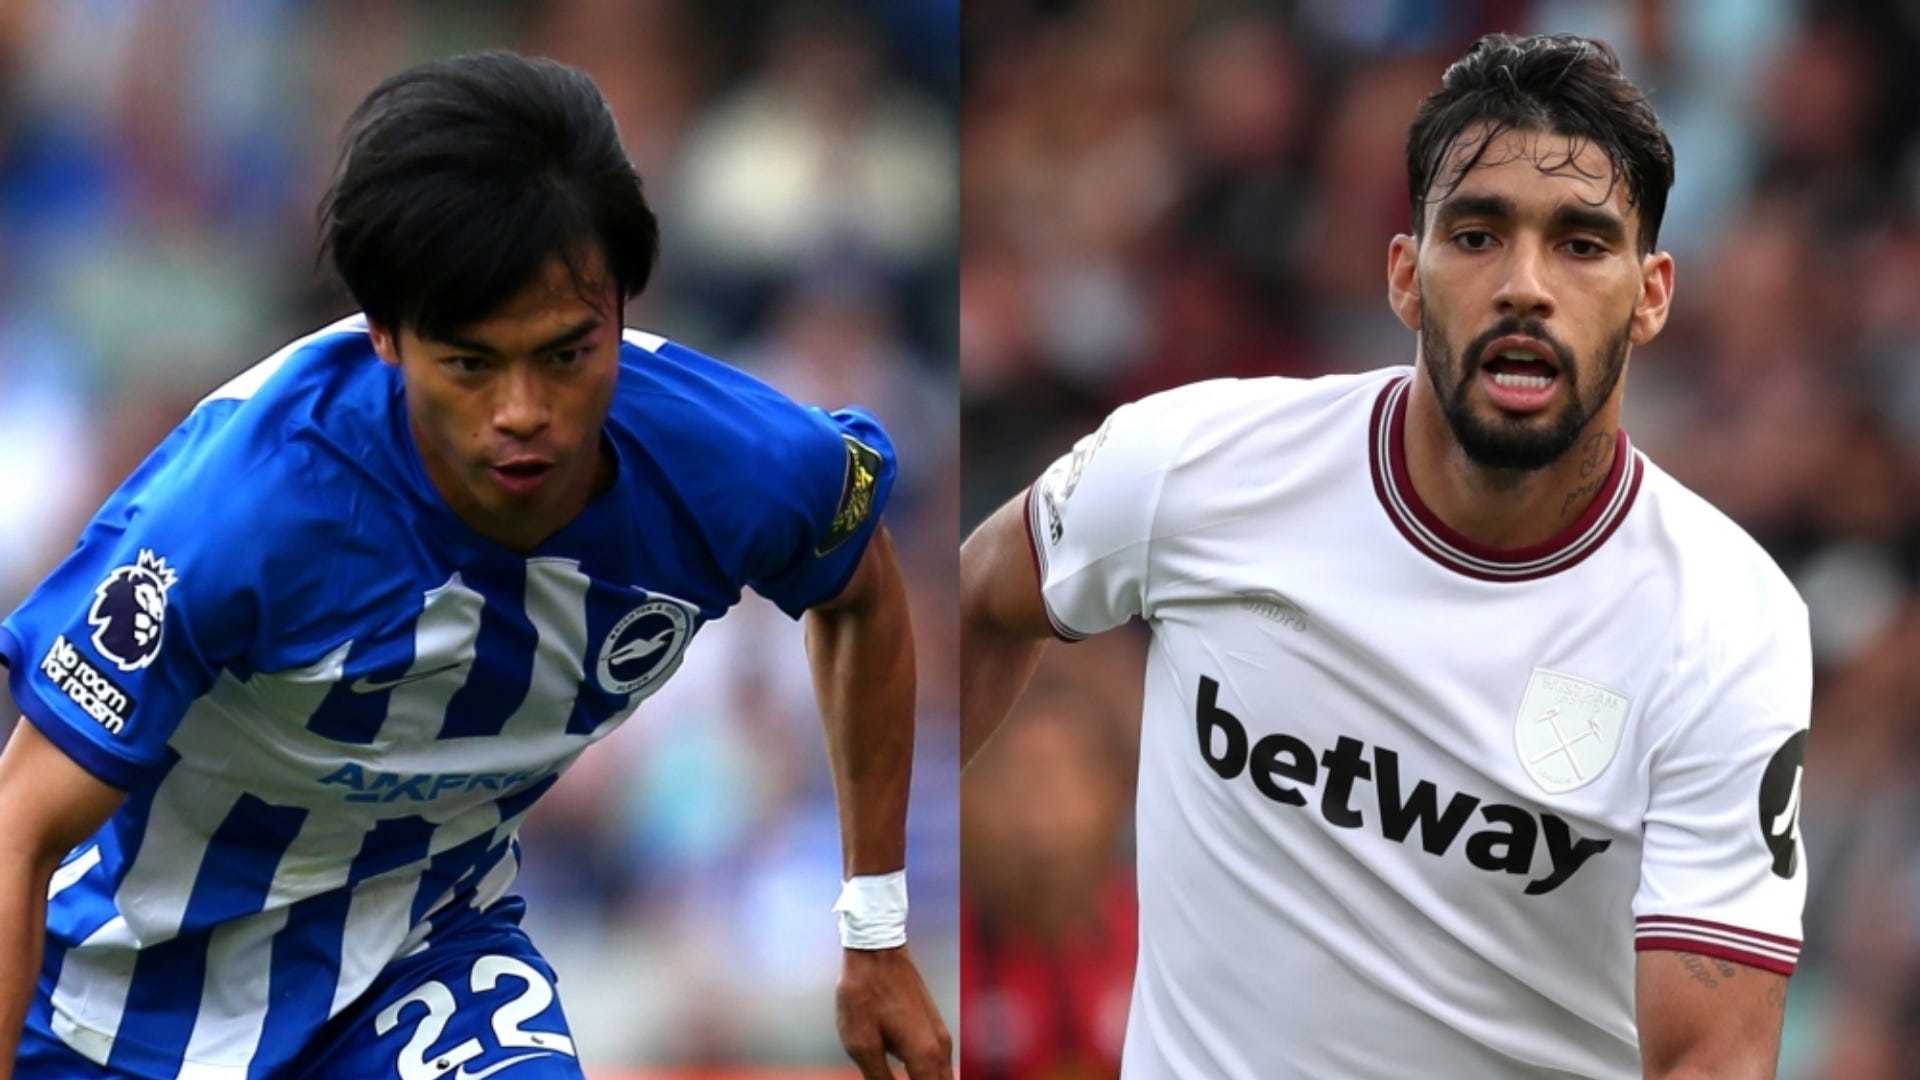 Brighton vs West Ham Live stream, TV channel, kick-off time and where to watch Goal US